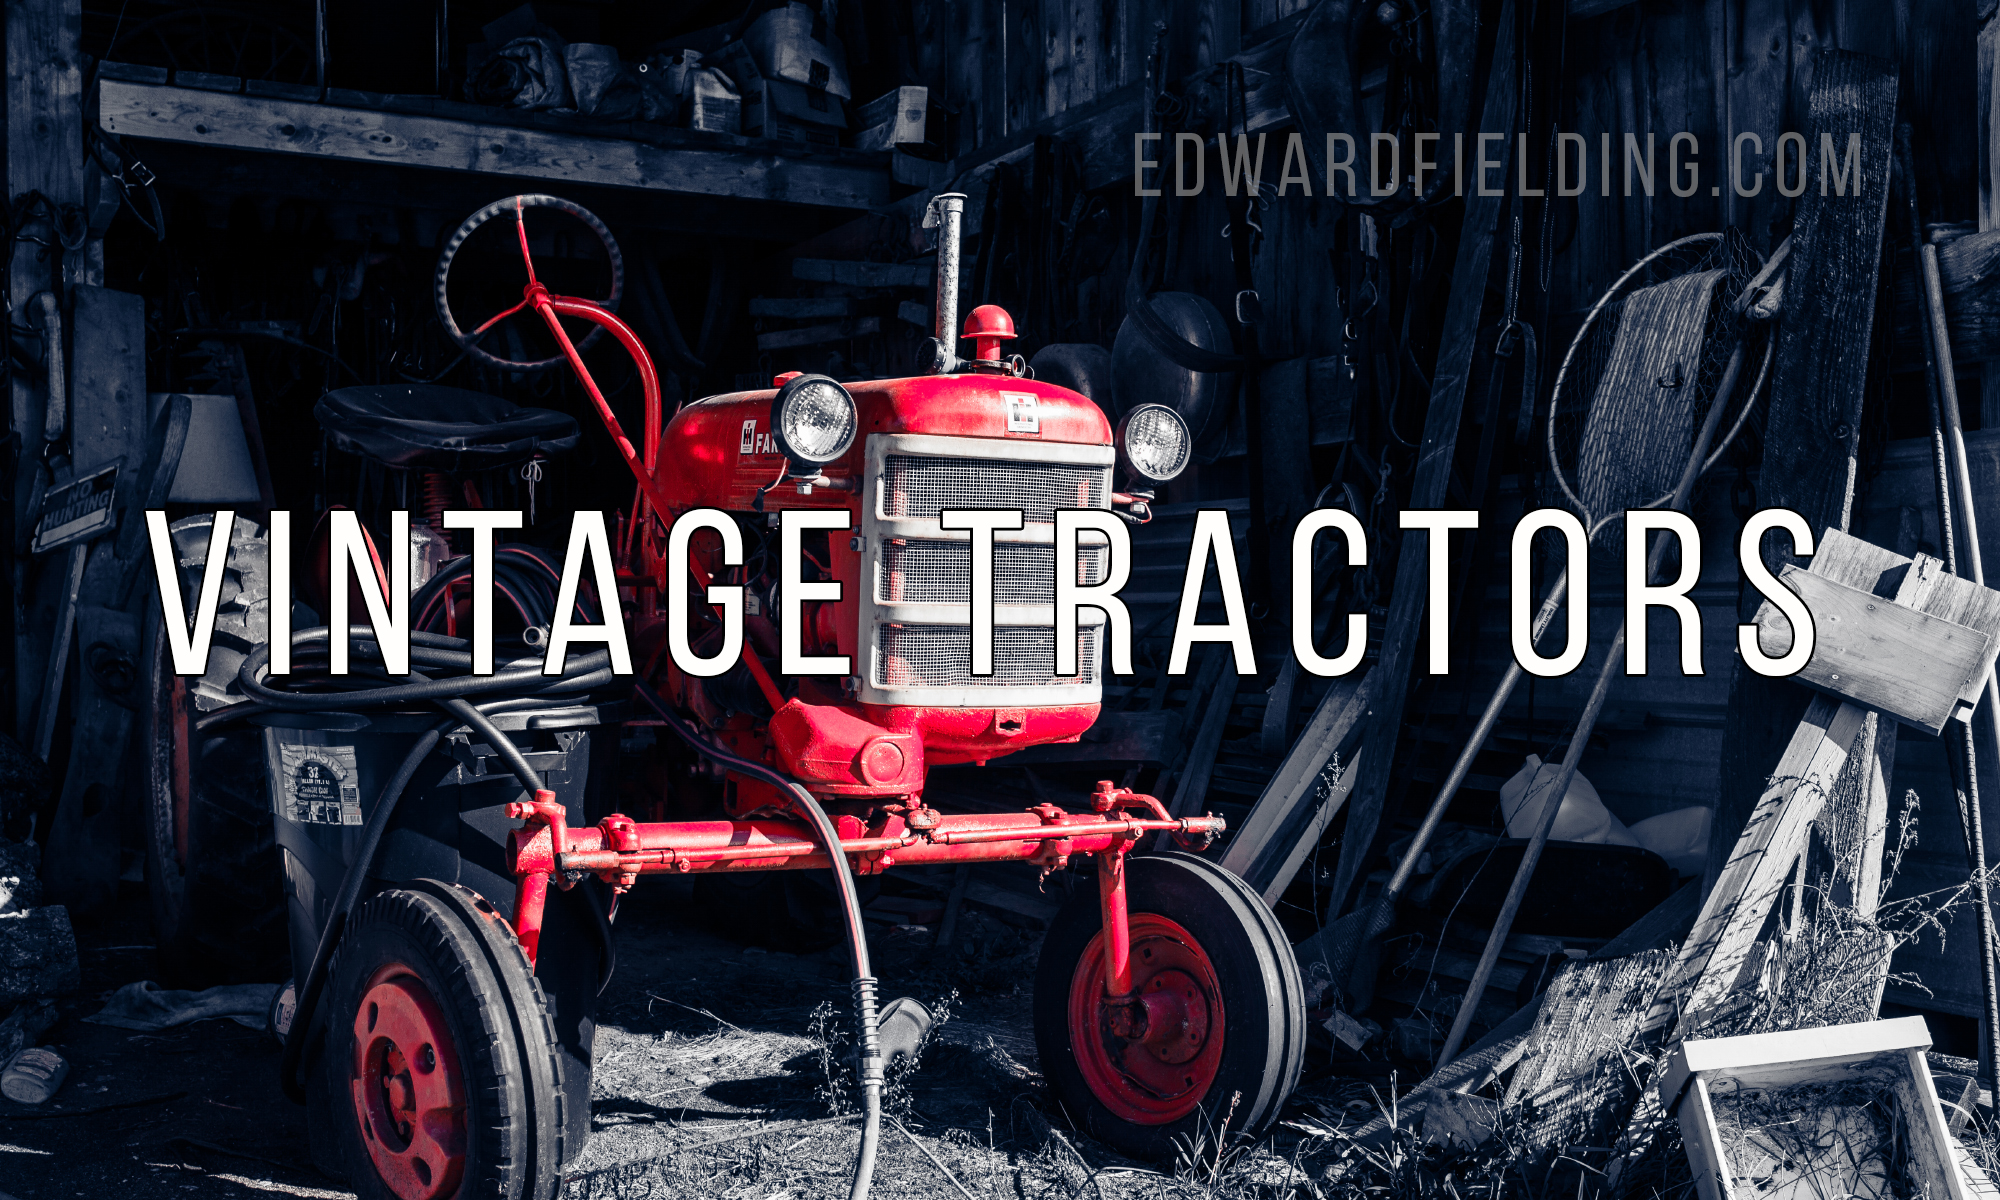 Vintage Tractor photographs